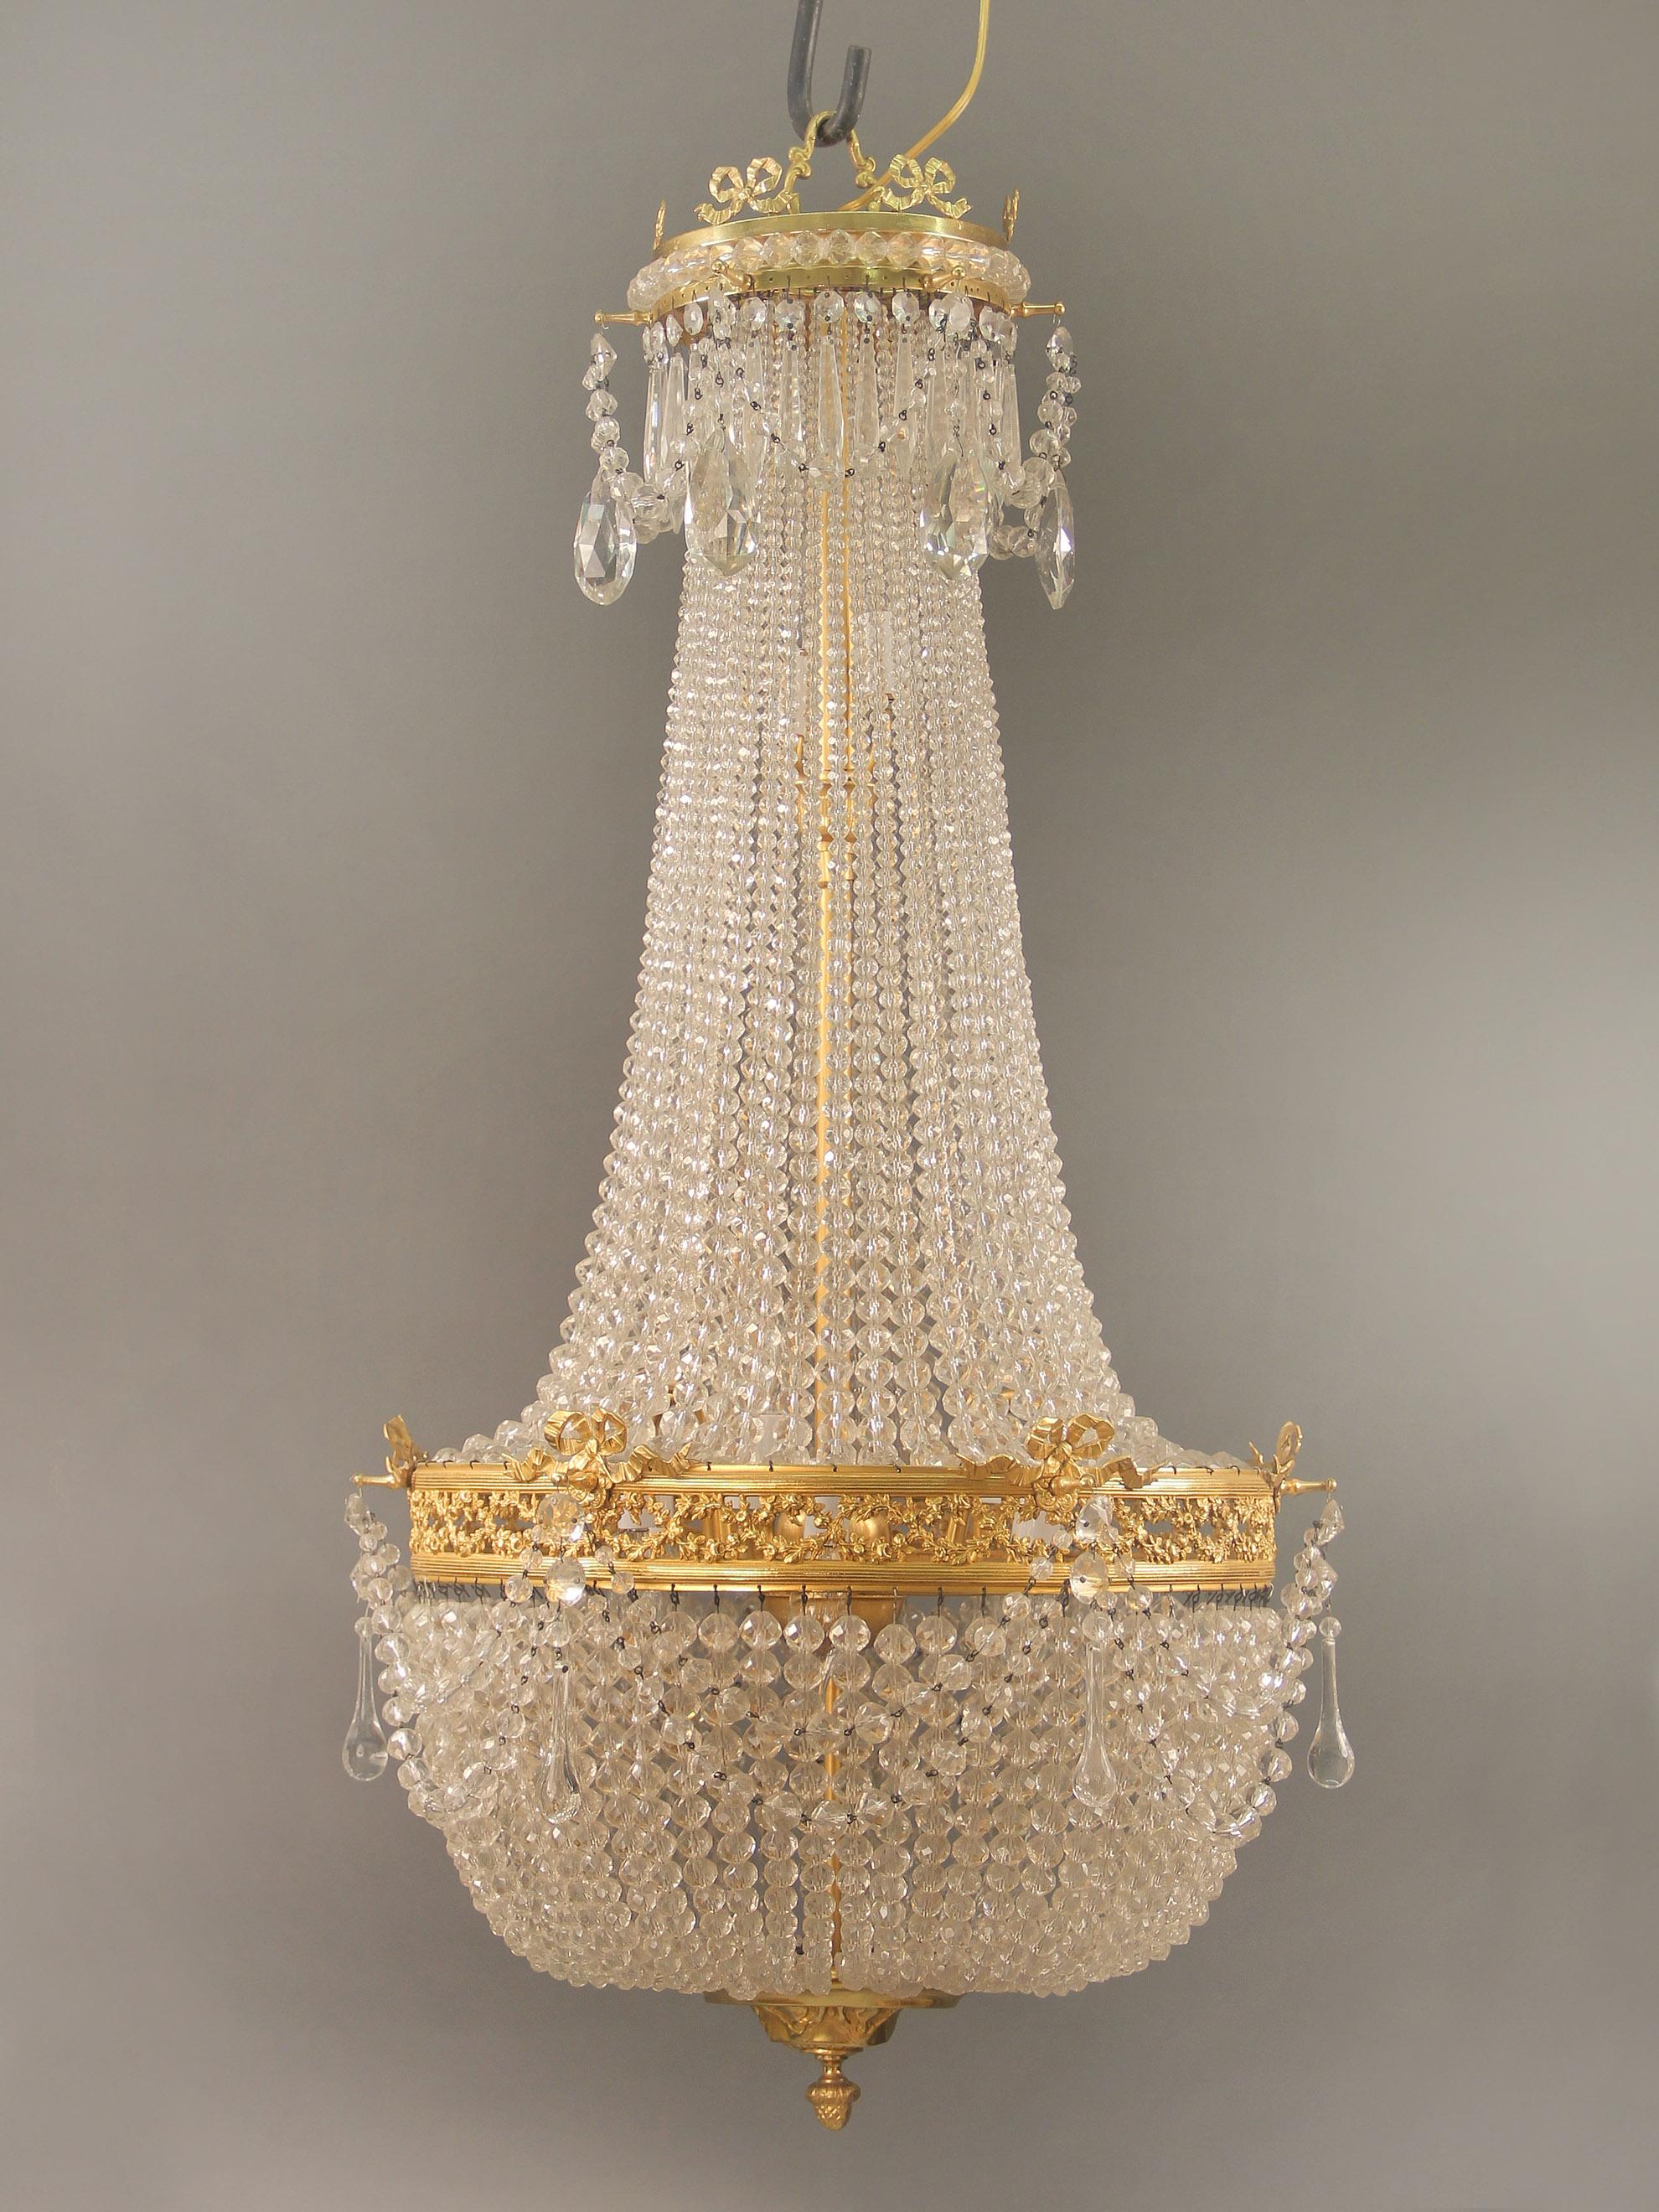 A Nice Late 19th Century Gilt Bronze Beaded Basket Eleven Light Chandelier

The crown designed with bronze bows above drop crystals and beaded swags, the flowing beads connected to a bronze conforming entwined garland frieze with more bows, tear